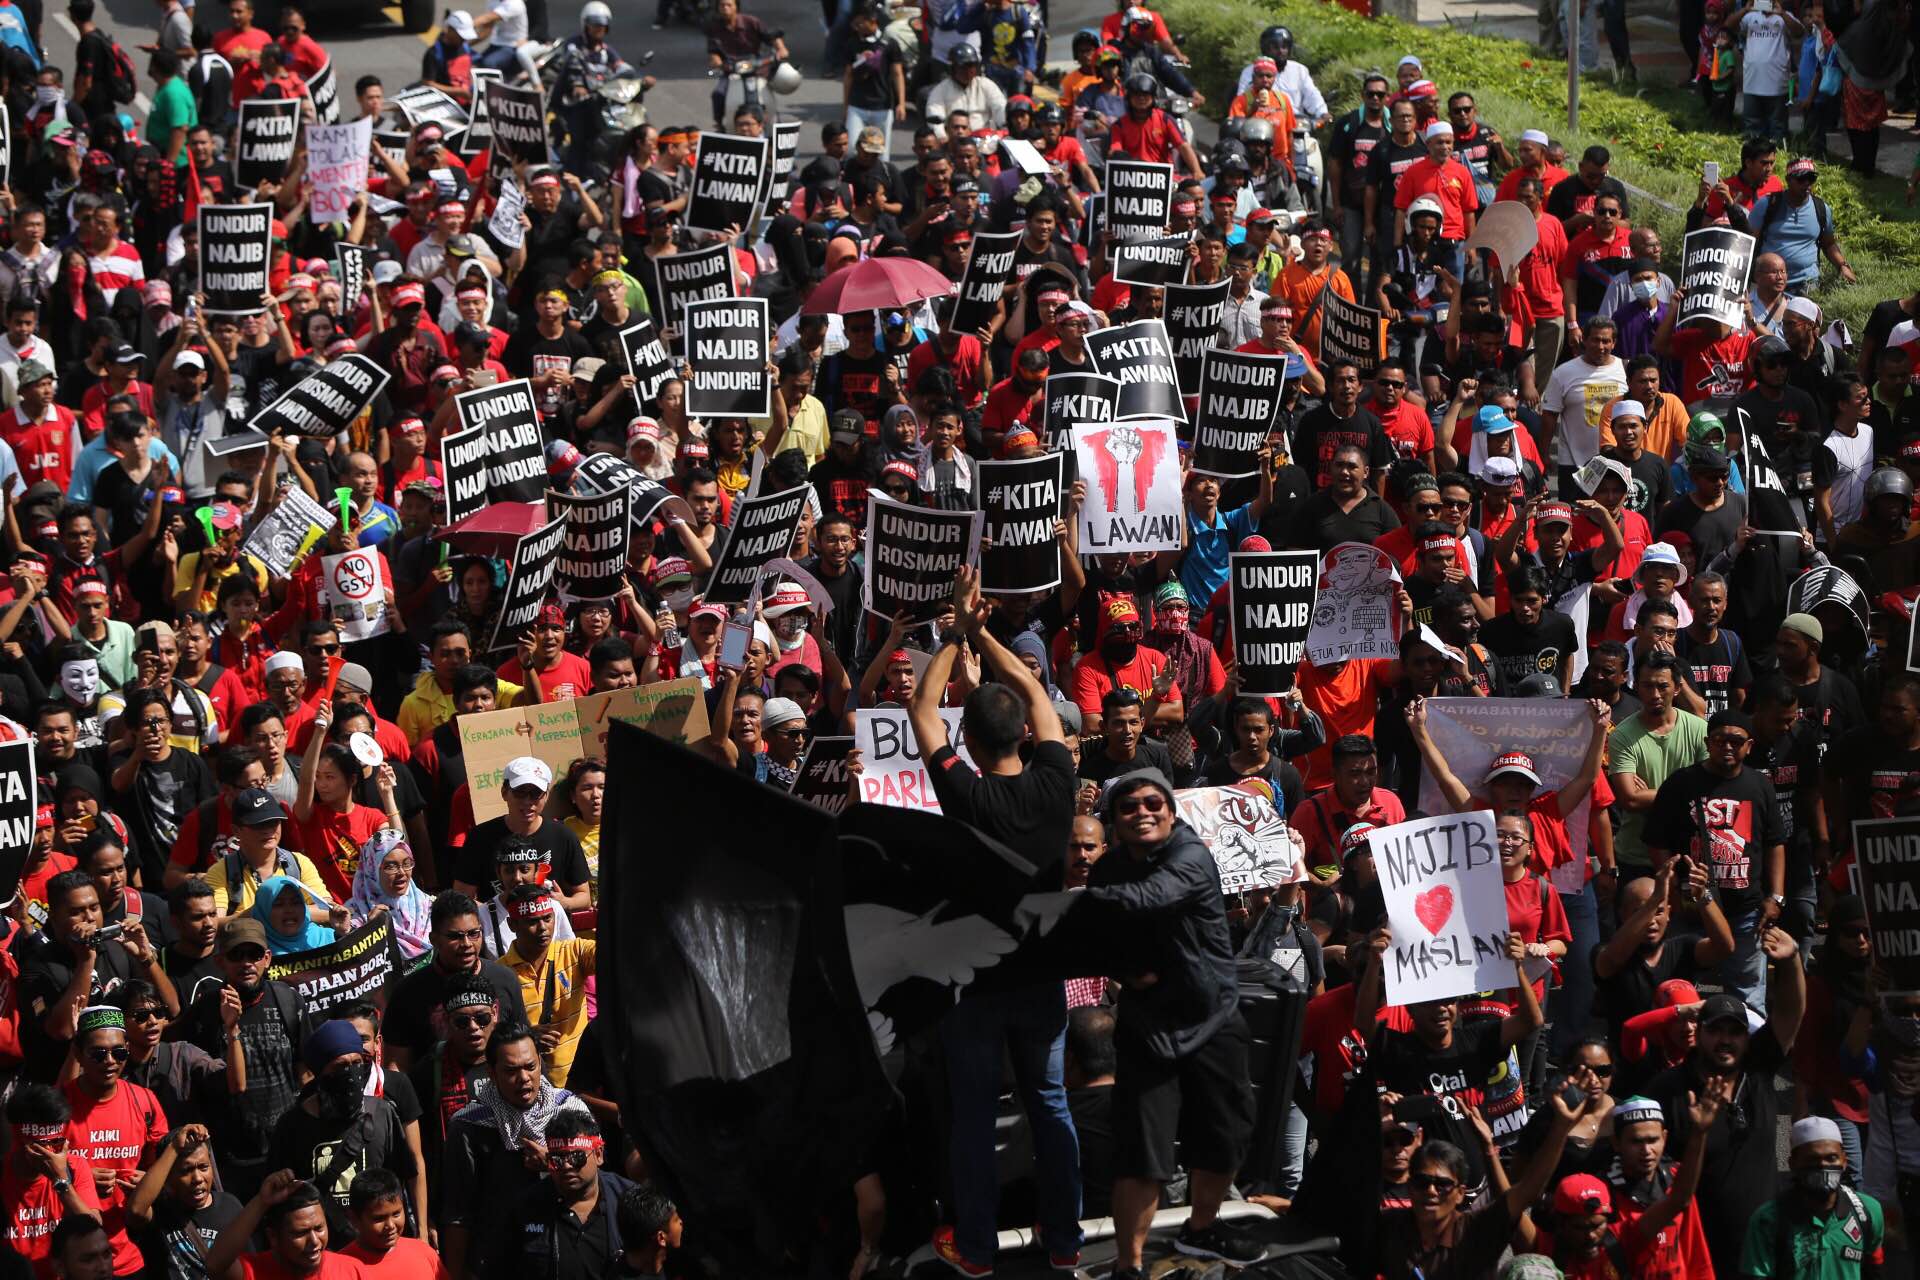 Last year's May Day rally in Kuala Lumpur. The Court of Appeal has said that organisers of assemblies can be punished according to the Peaceful Assembly Act 2012. – The Malaysian Insider filepic, October 1, 2015.